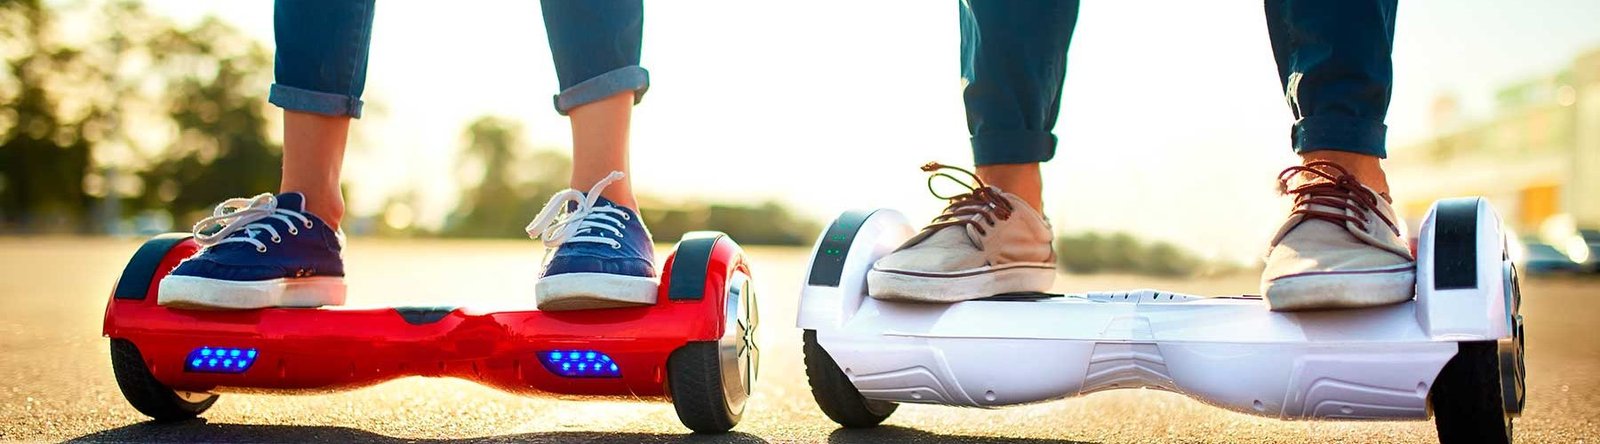 The Best Hoverboard for Kids - KidsGearGuide